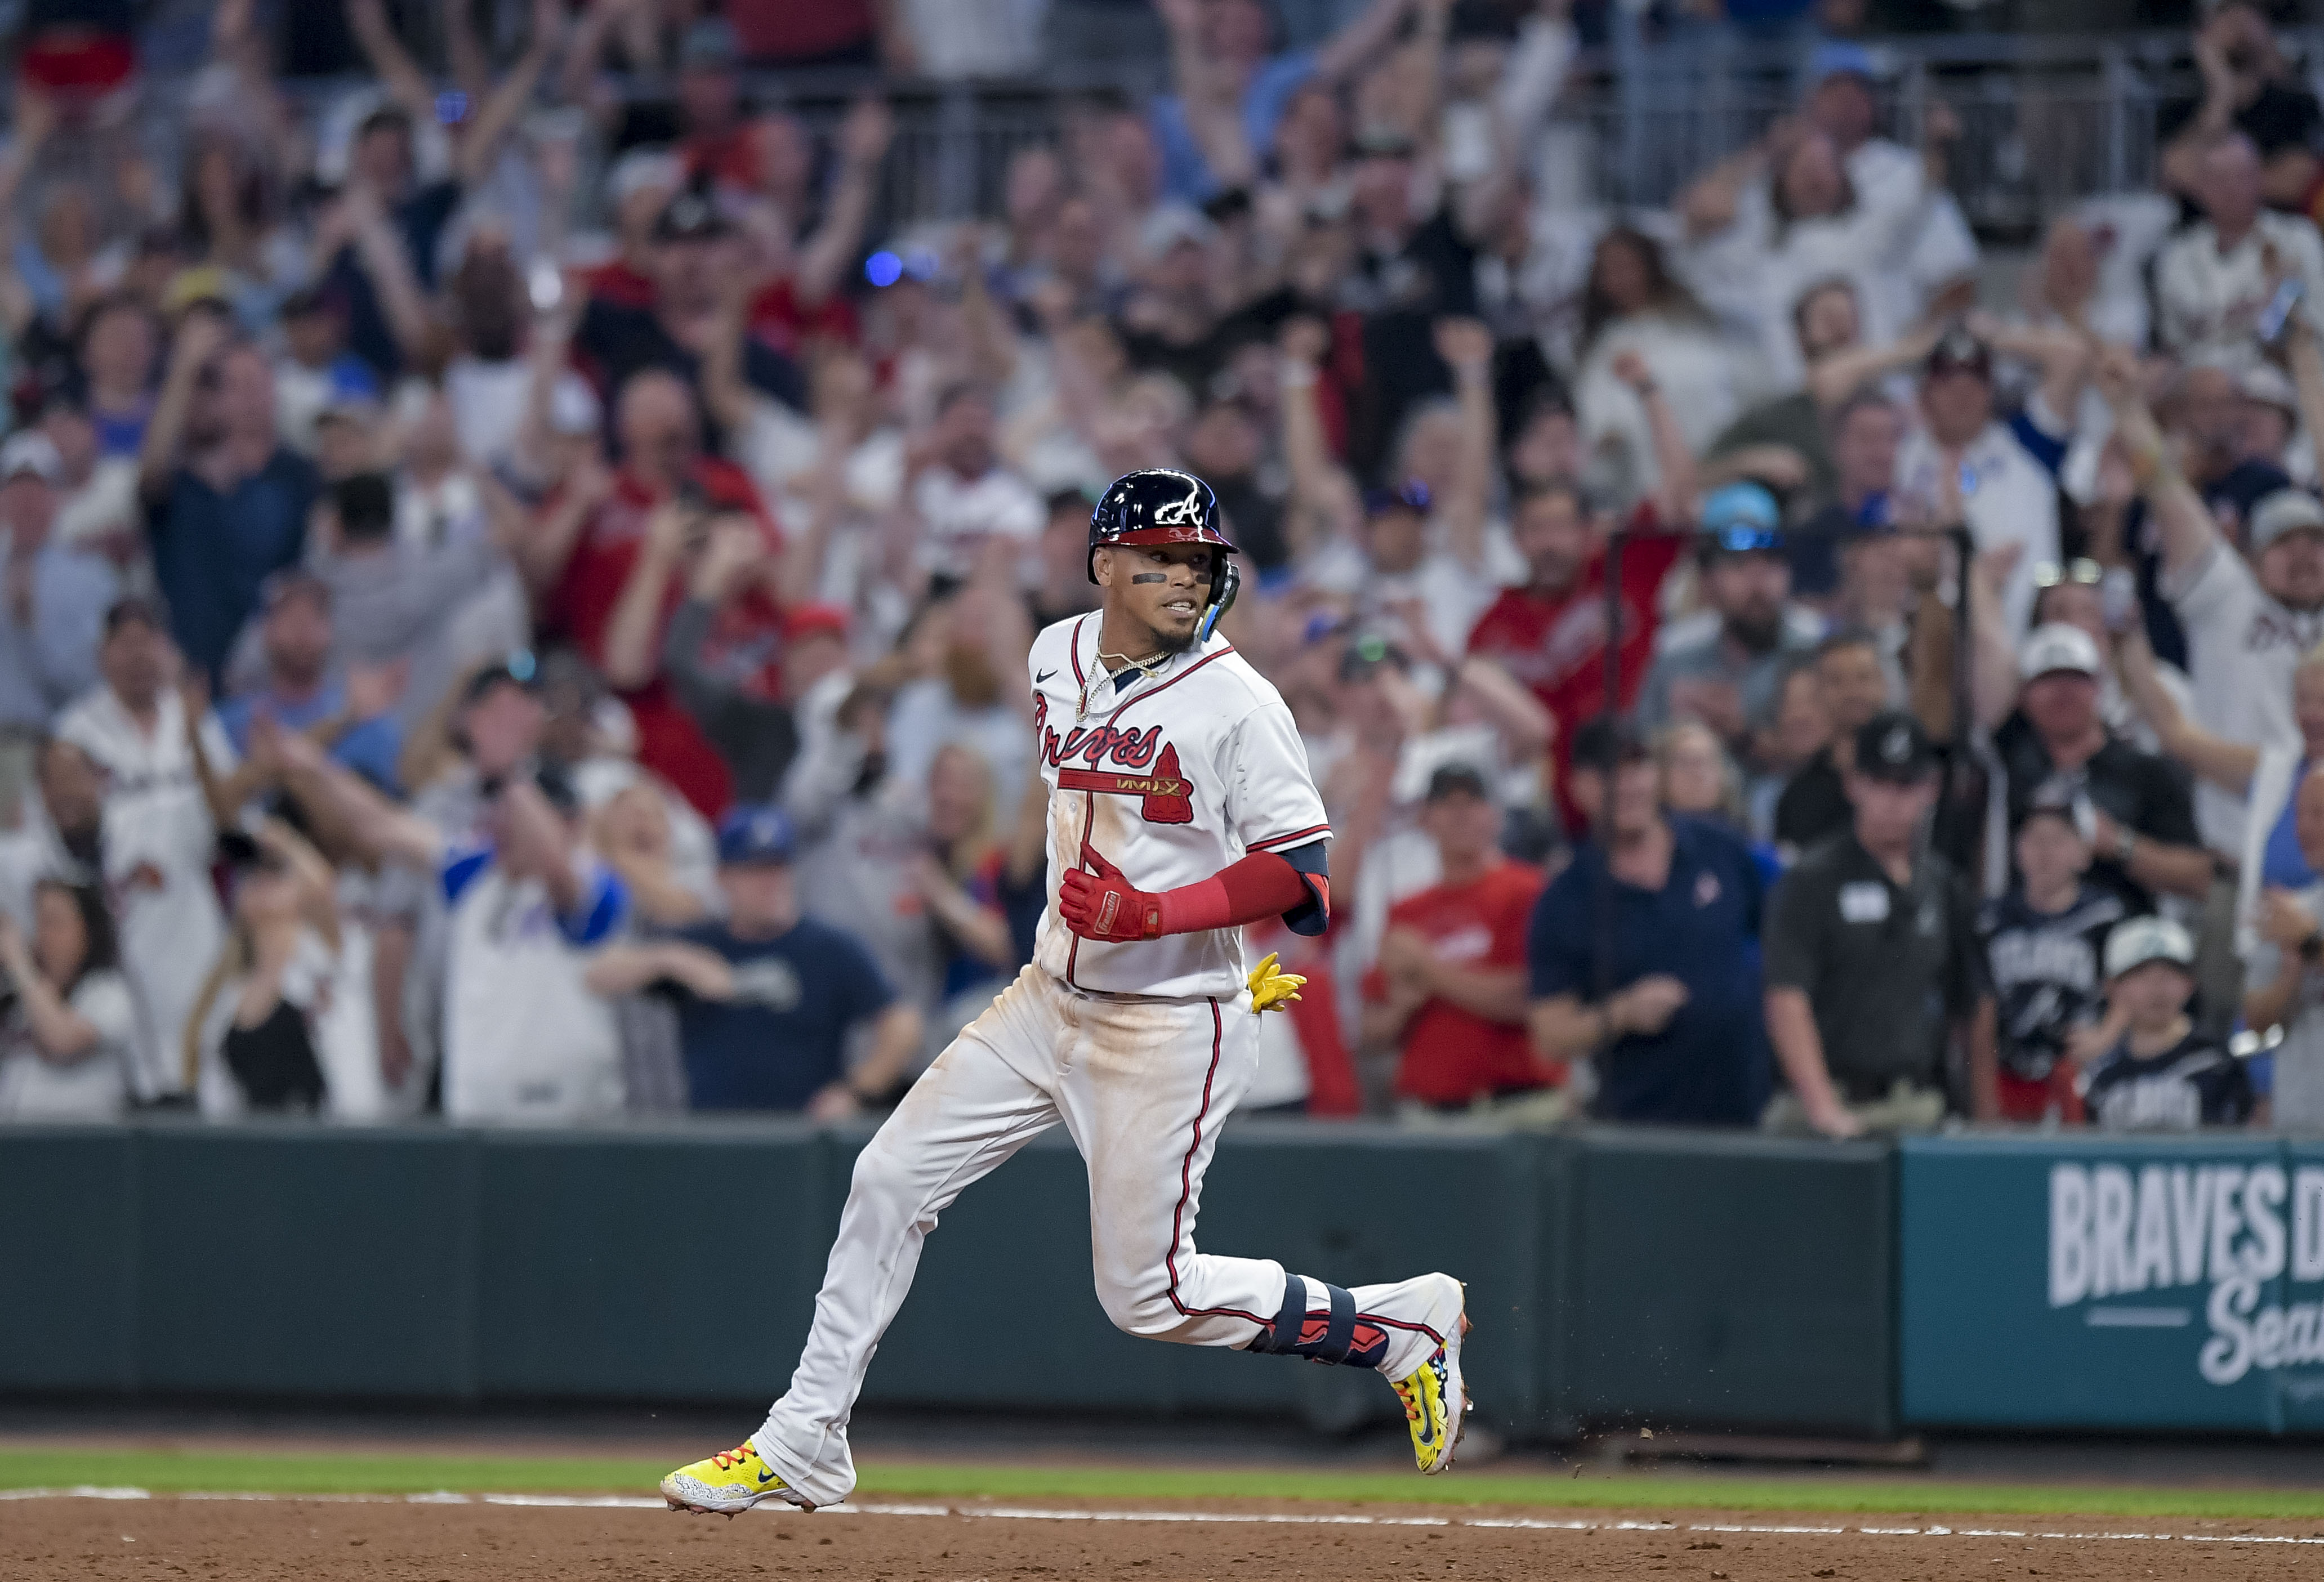 Arcia's walk-off single gives Braves 7-6 win over Padres